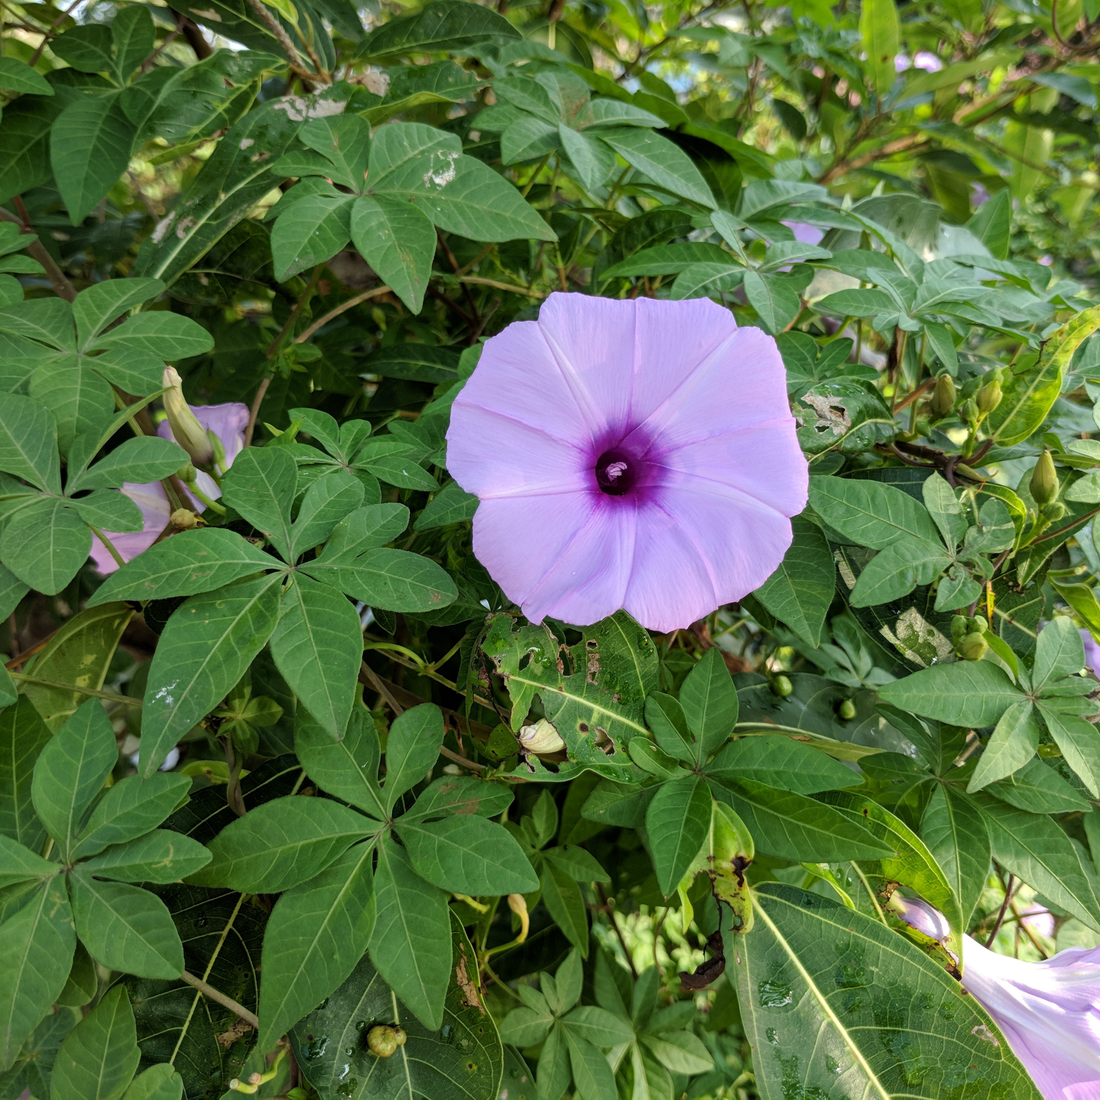 Messina Creeper (Ipomoea cairica) Flowering Live Plant